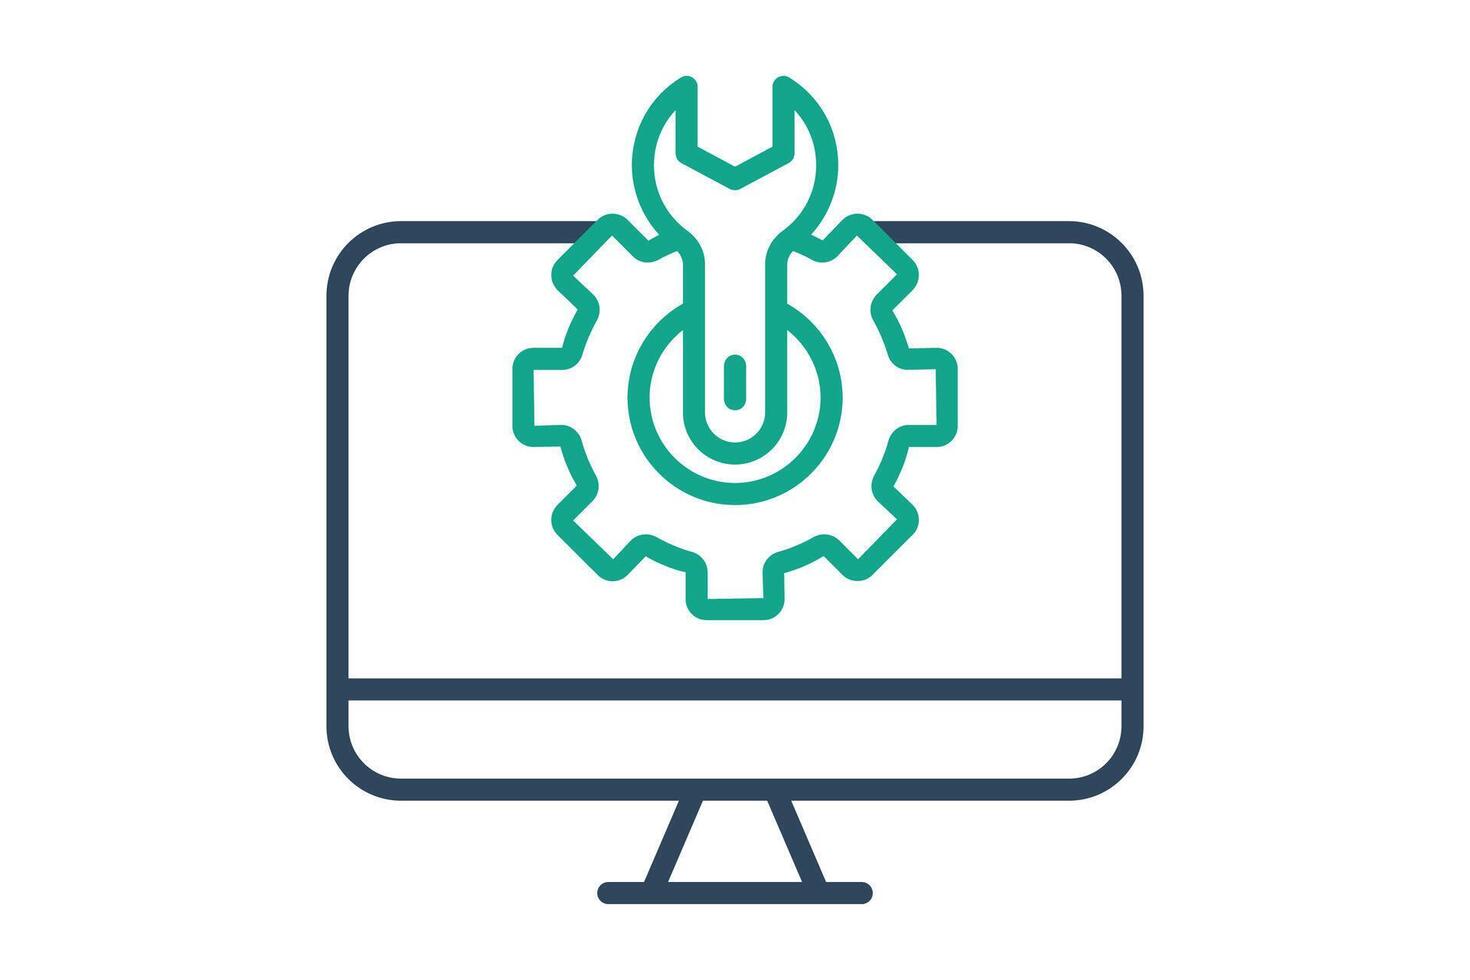 computer setting icon. computer with gear and wrench. icon related to information technology. line icon style. technology element illustration vector